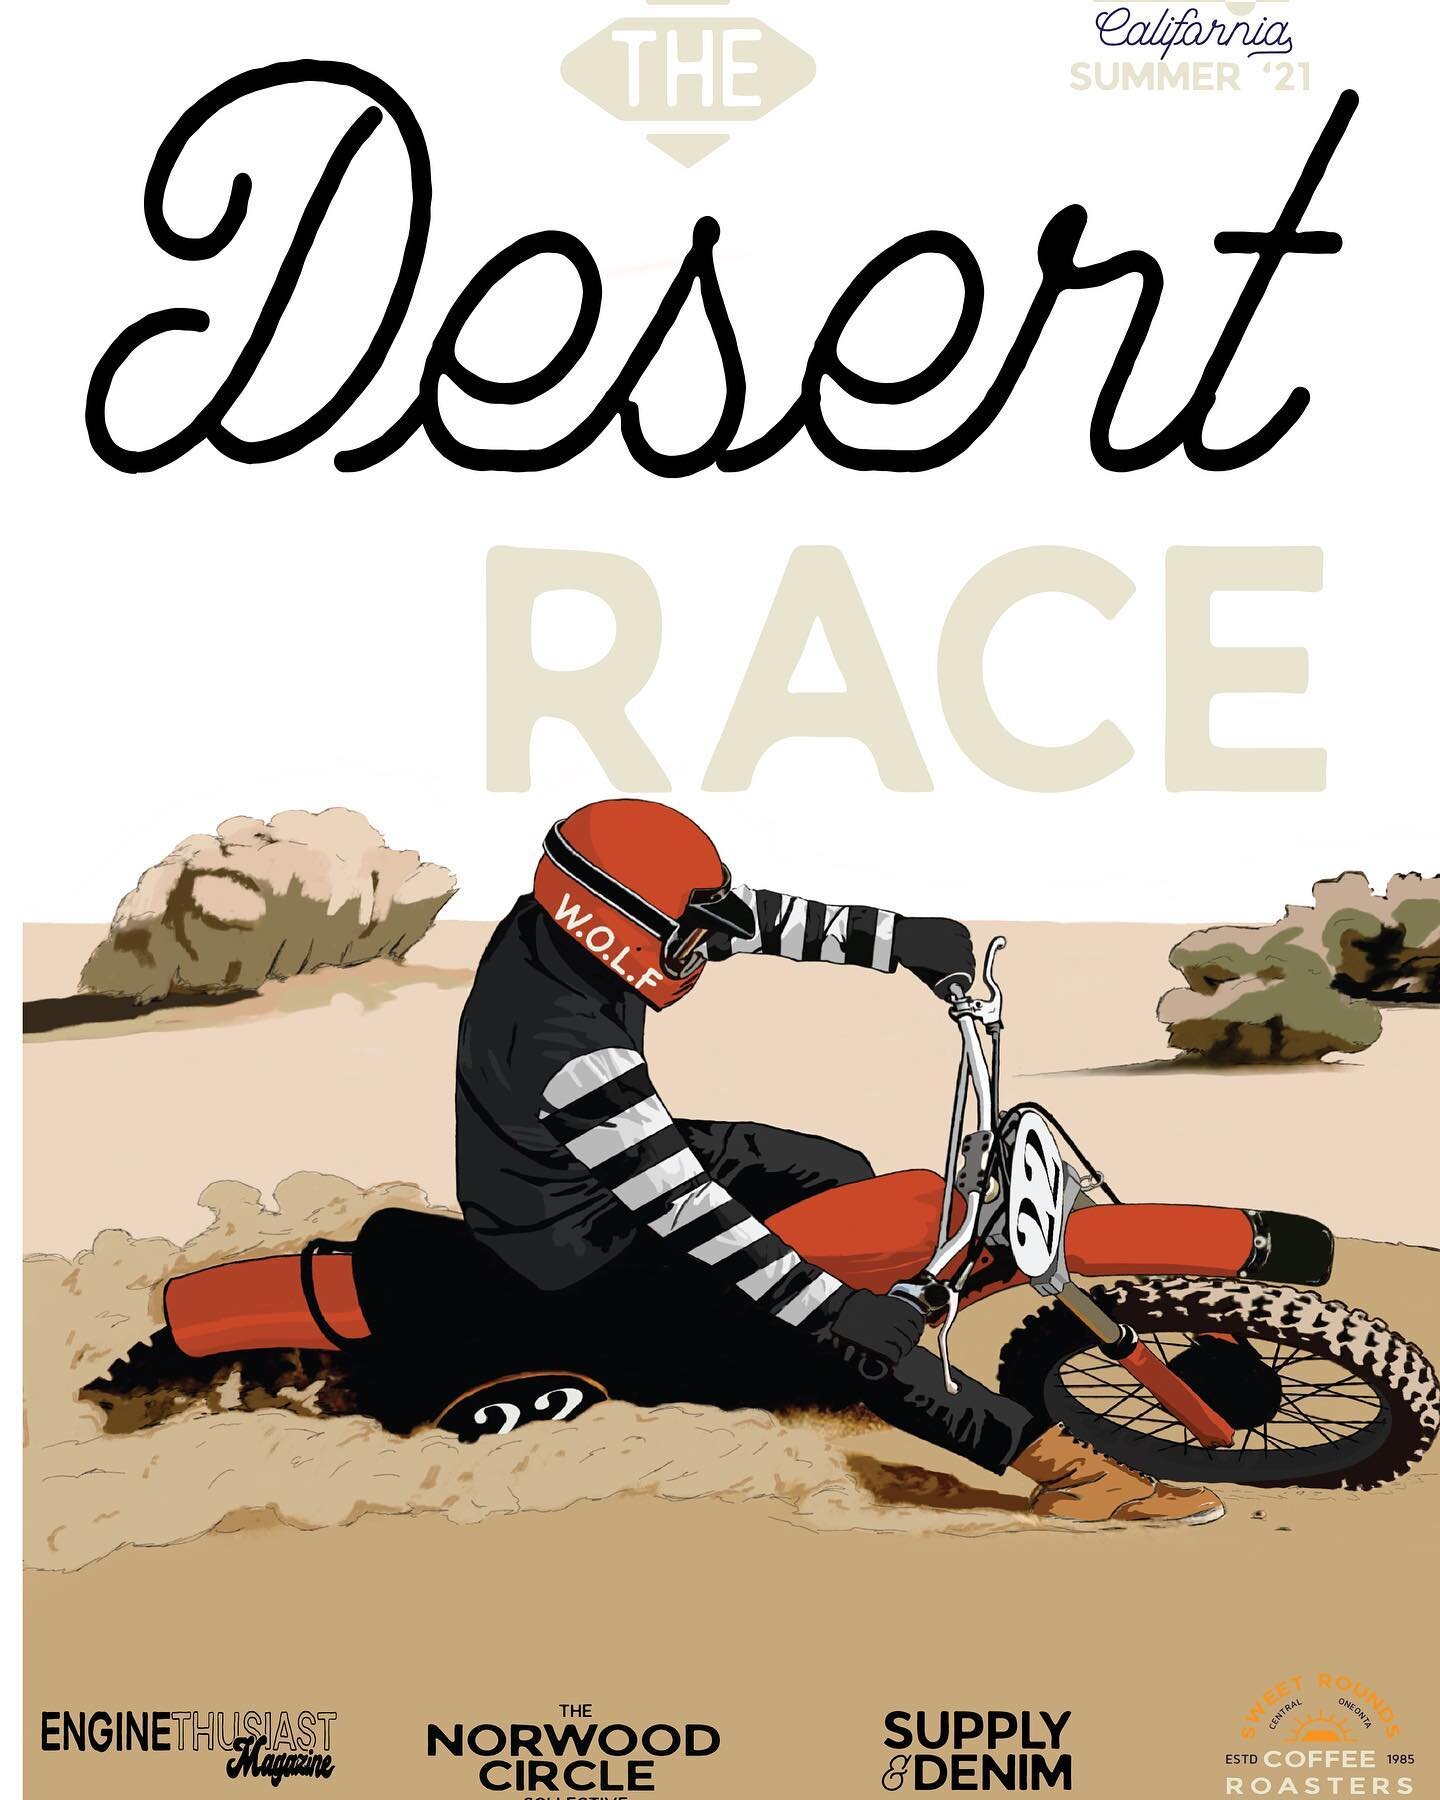 Dear Desert Racers:
&bull;
&bull;
With a heavy heart we have decided to cancel all postponed events for calendar year 2020. Due to the pandemic and other things outside of our control, we look forward to 2021 to relaunch our desert filled adventures.